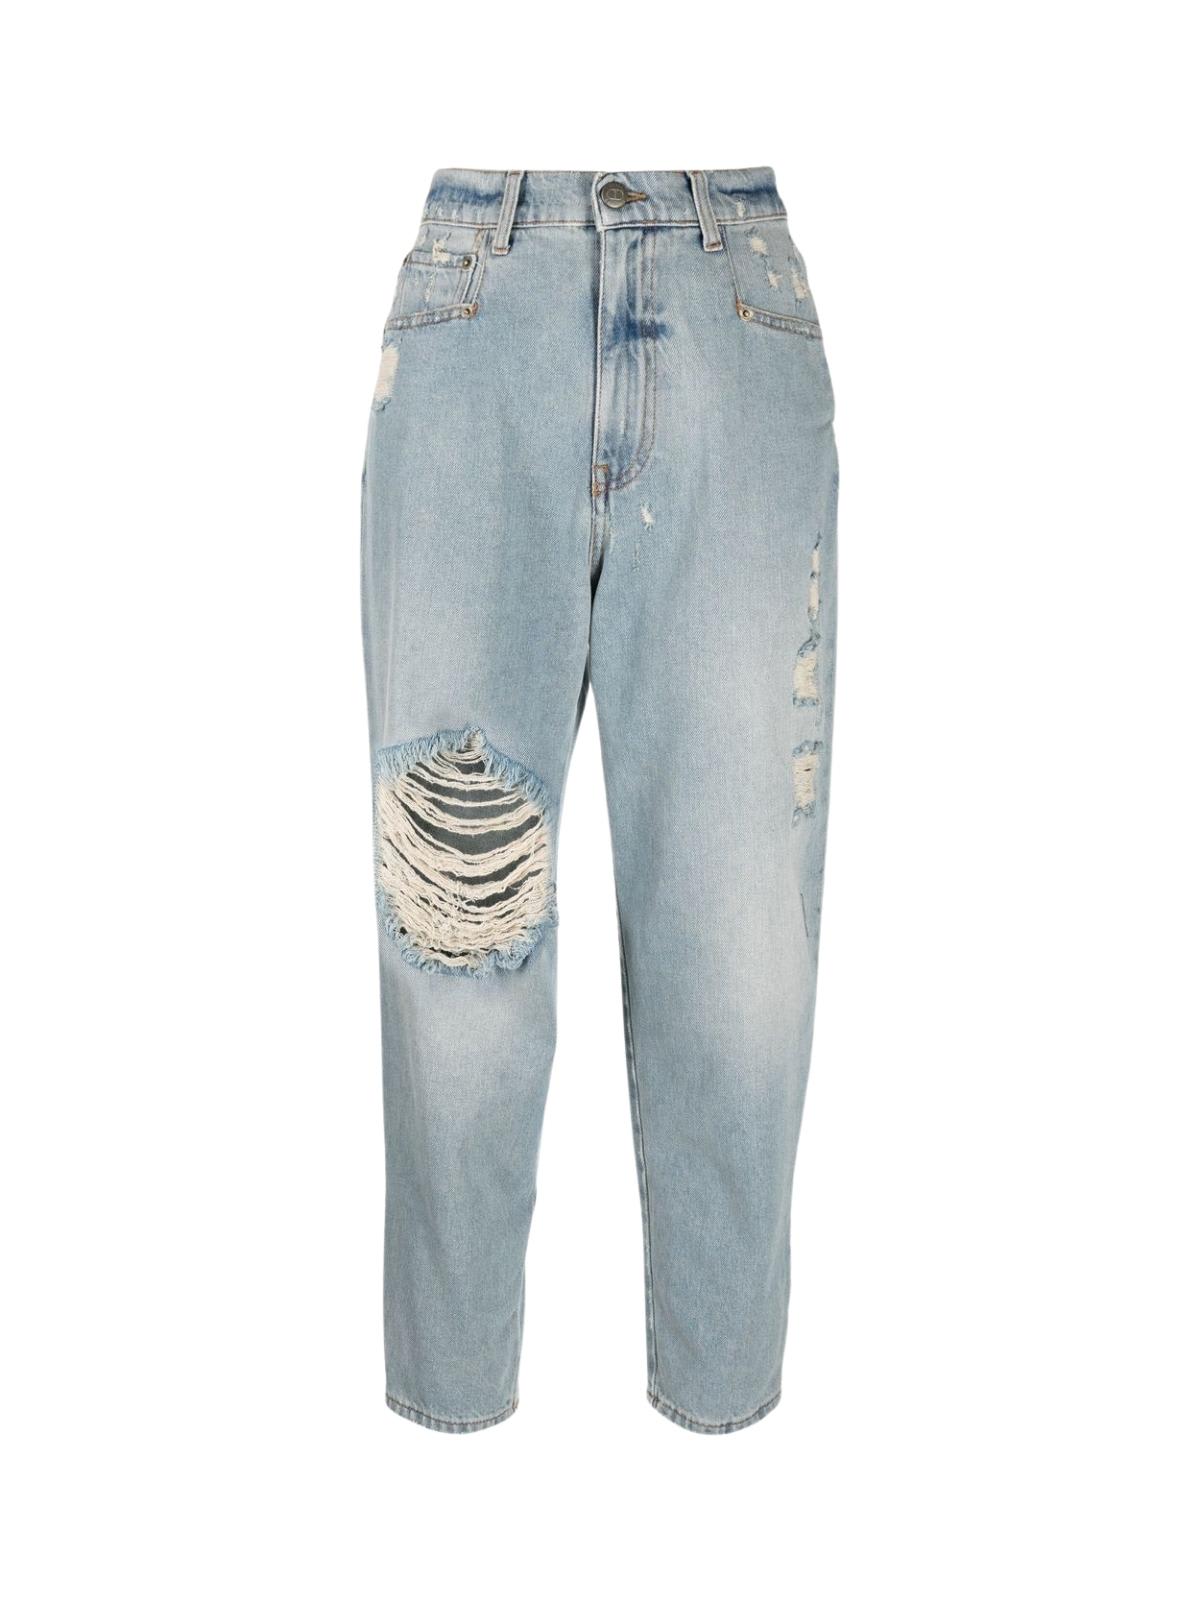 TwinSet Ripped Carrot Jeans